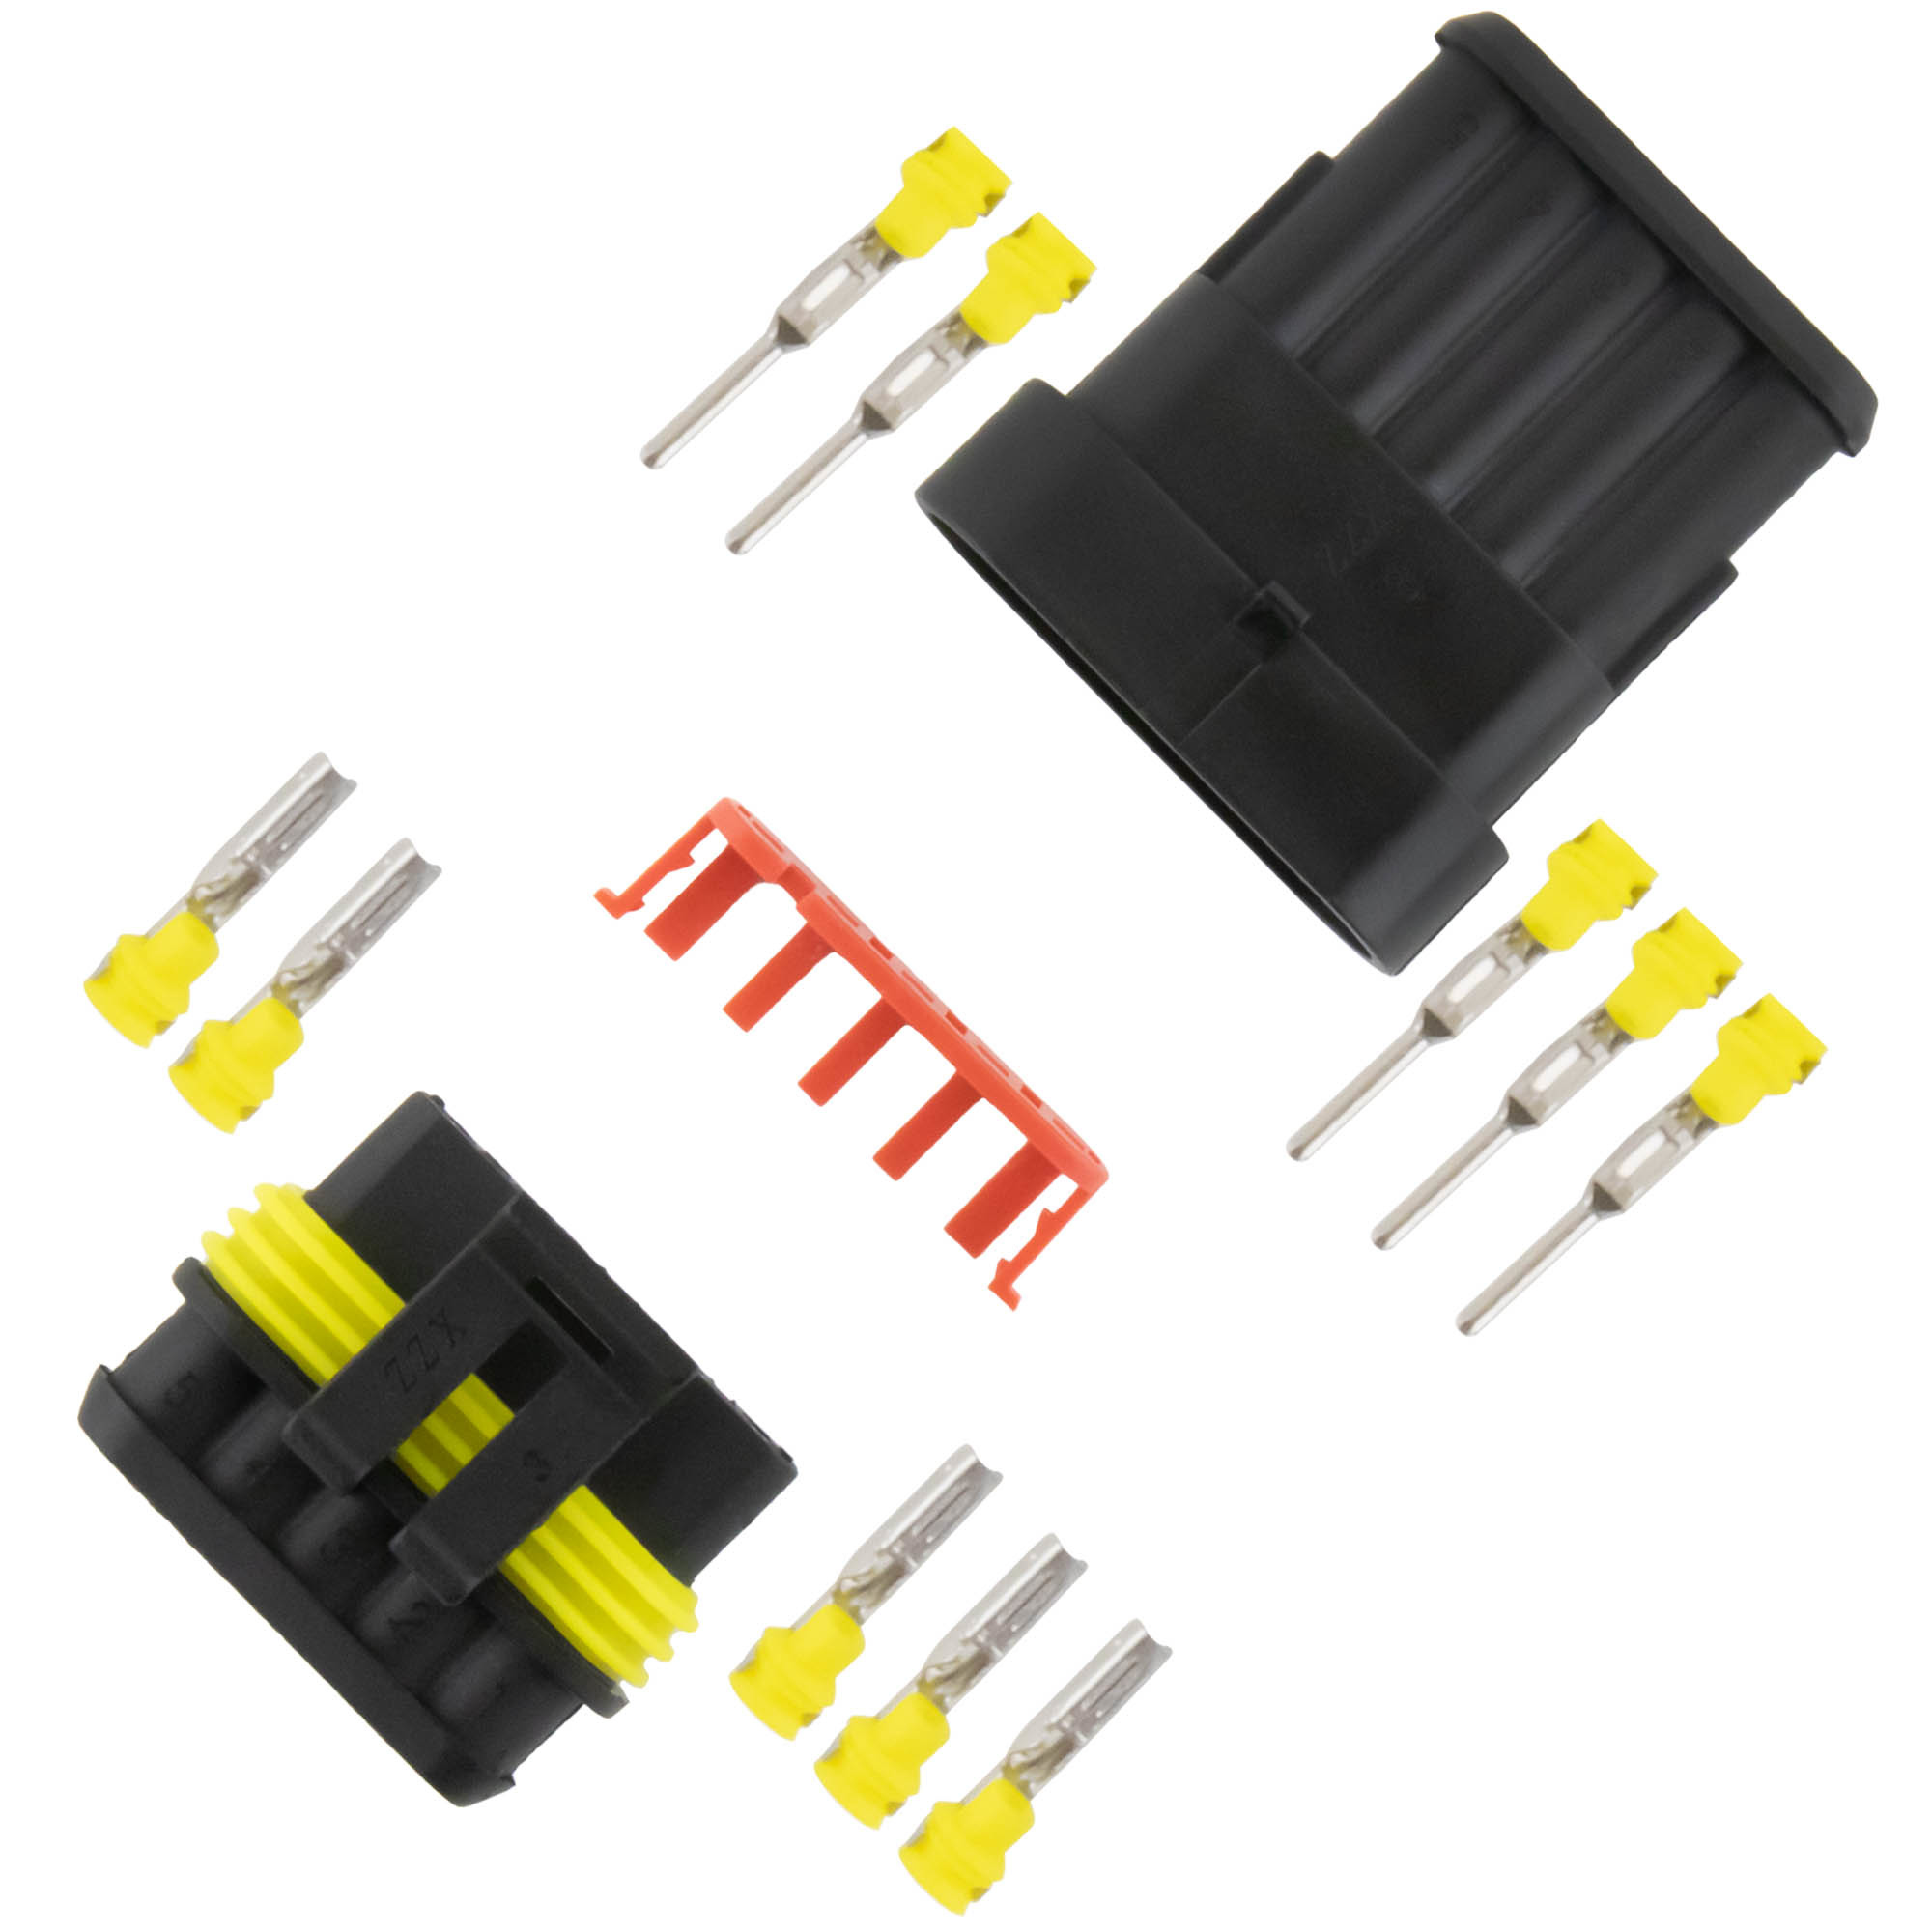 Cable Connector 5-Pin - 10PCS